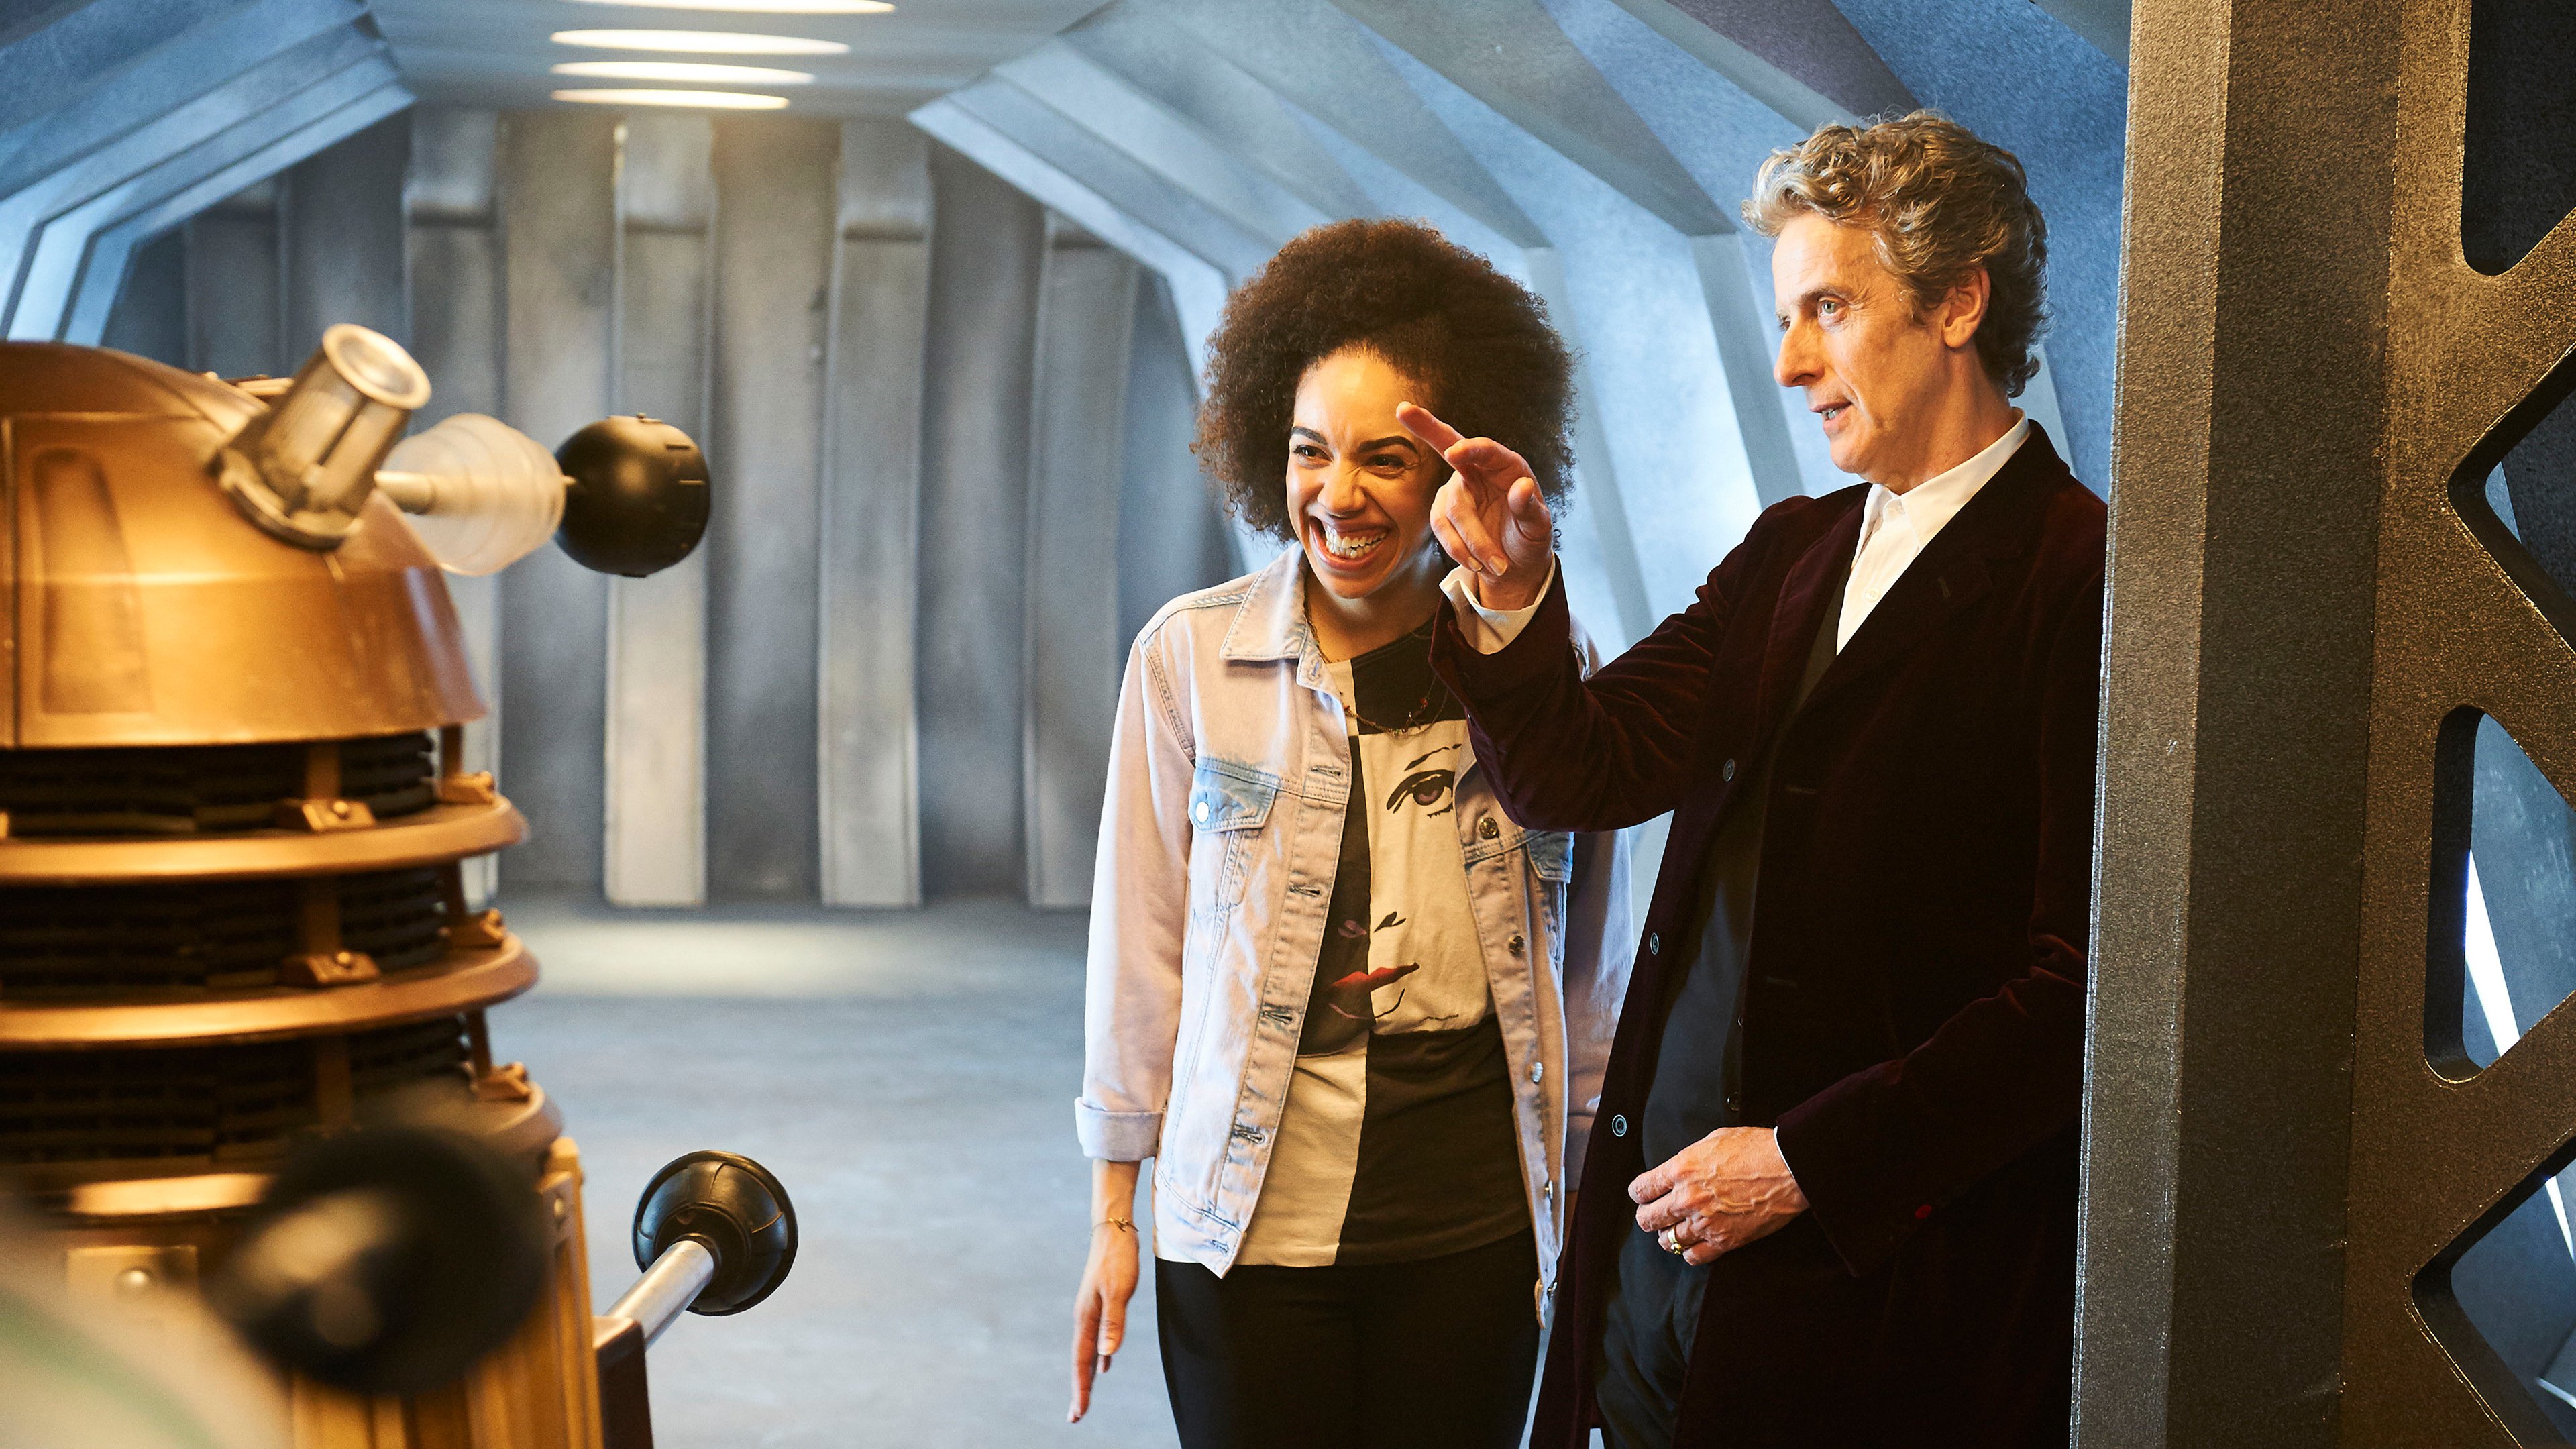 TV Show Doctor Who 3840x2160